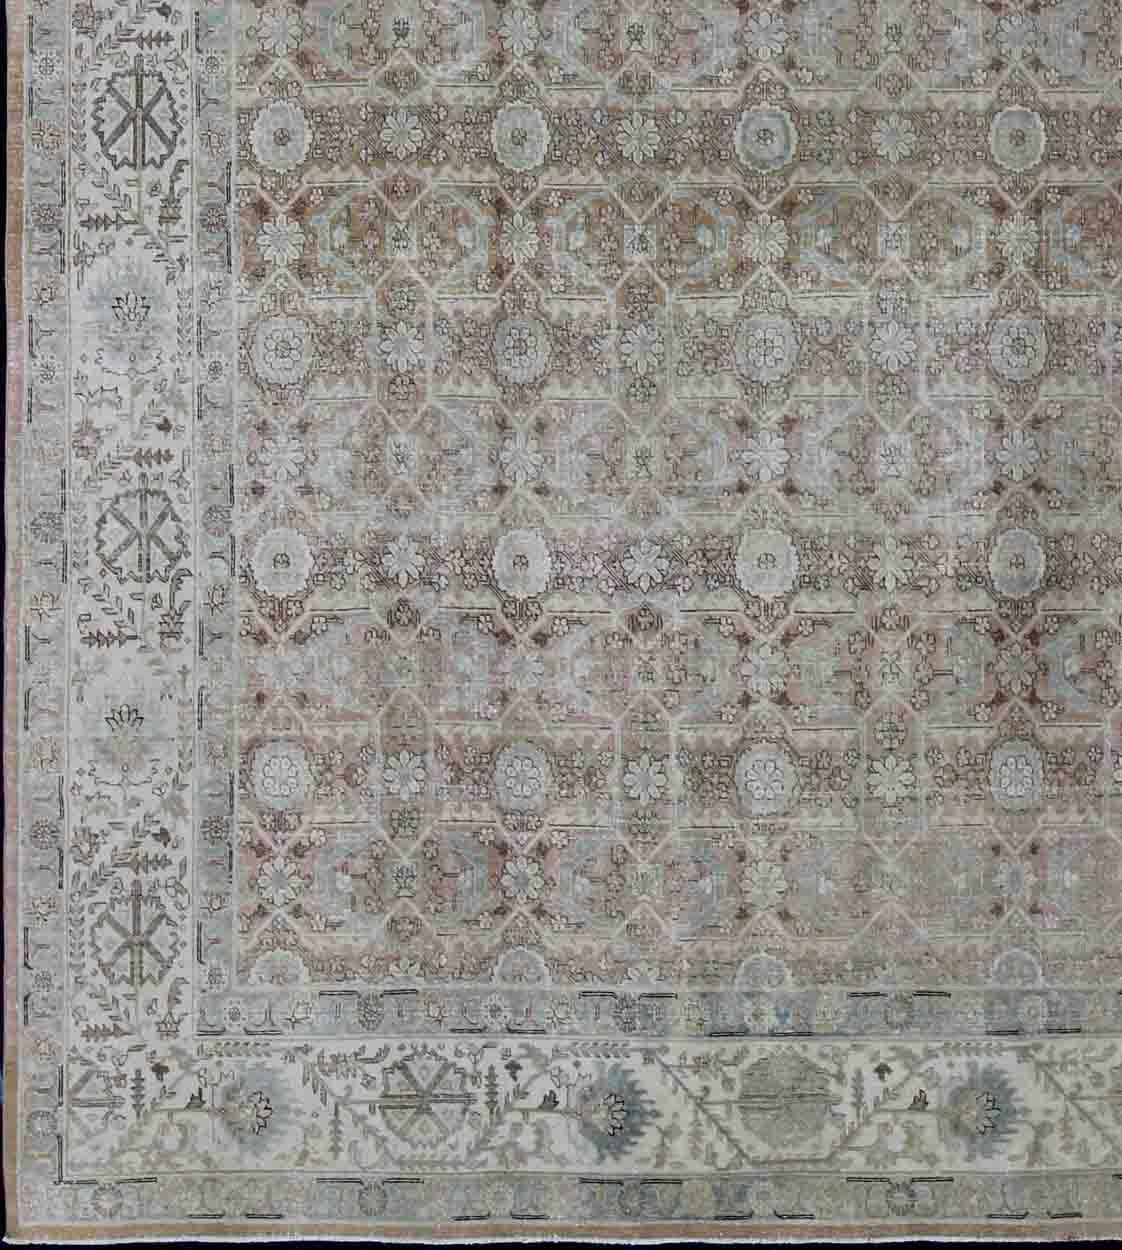 Antique Persian Tabriz rug with all-over floral design in ivory, blush, brown, light blue. Keivan Woven Arts / rug 1912-132, country of origin / type: Iran / Tabriz, circa 1920
Measures: 11'4 x 14'8.
This antique Persian Tabriz carpet features a